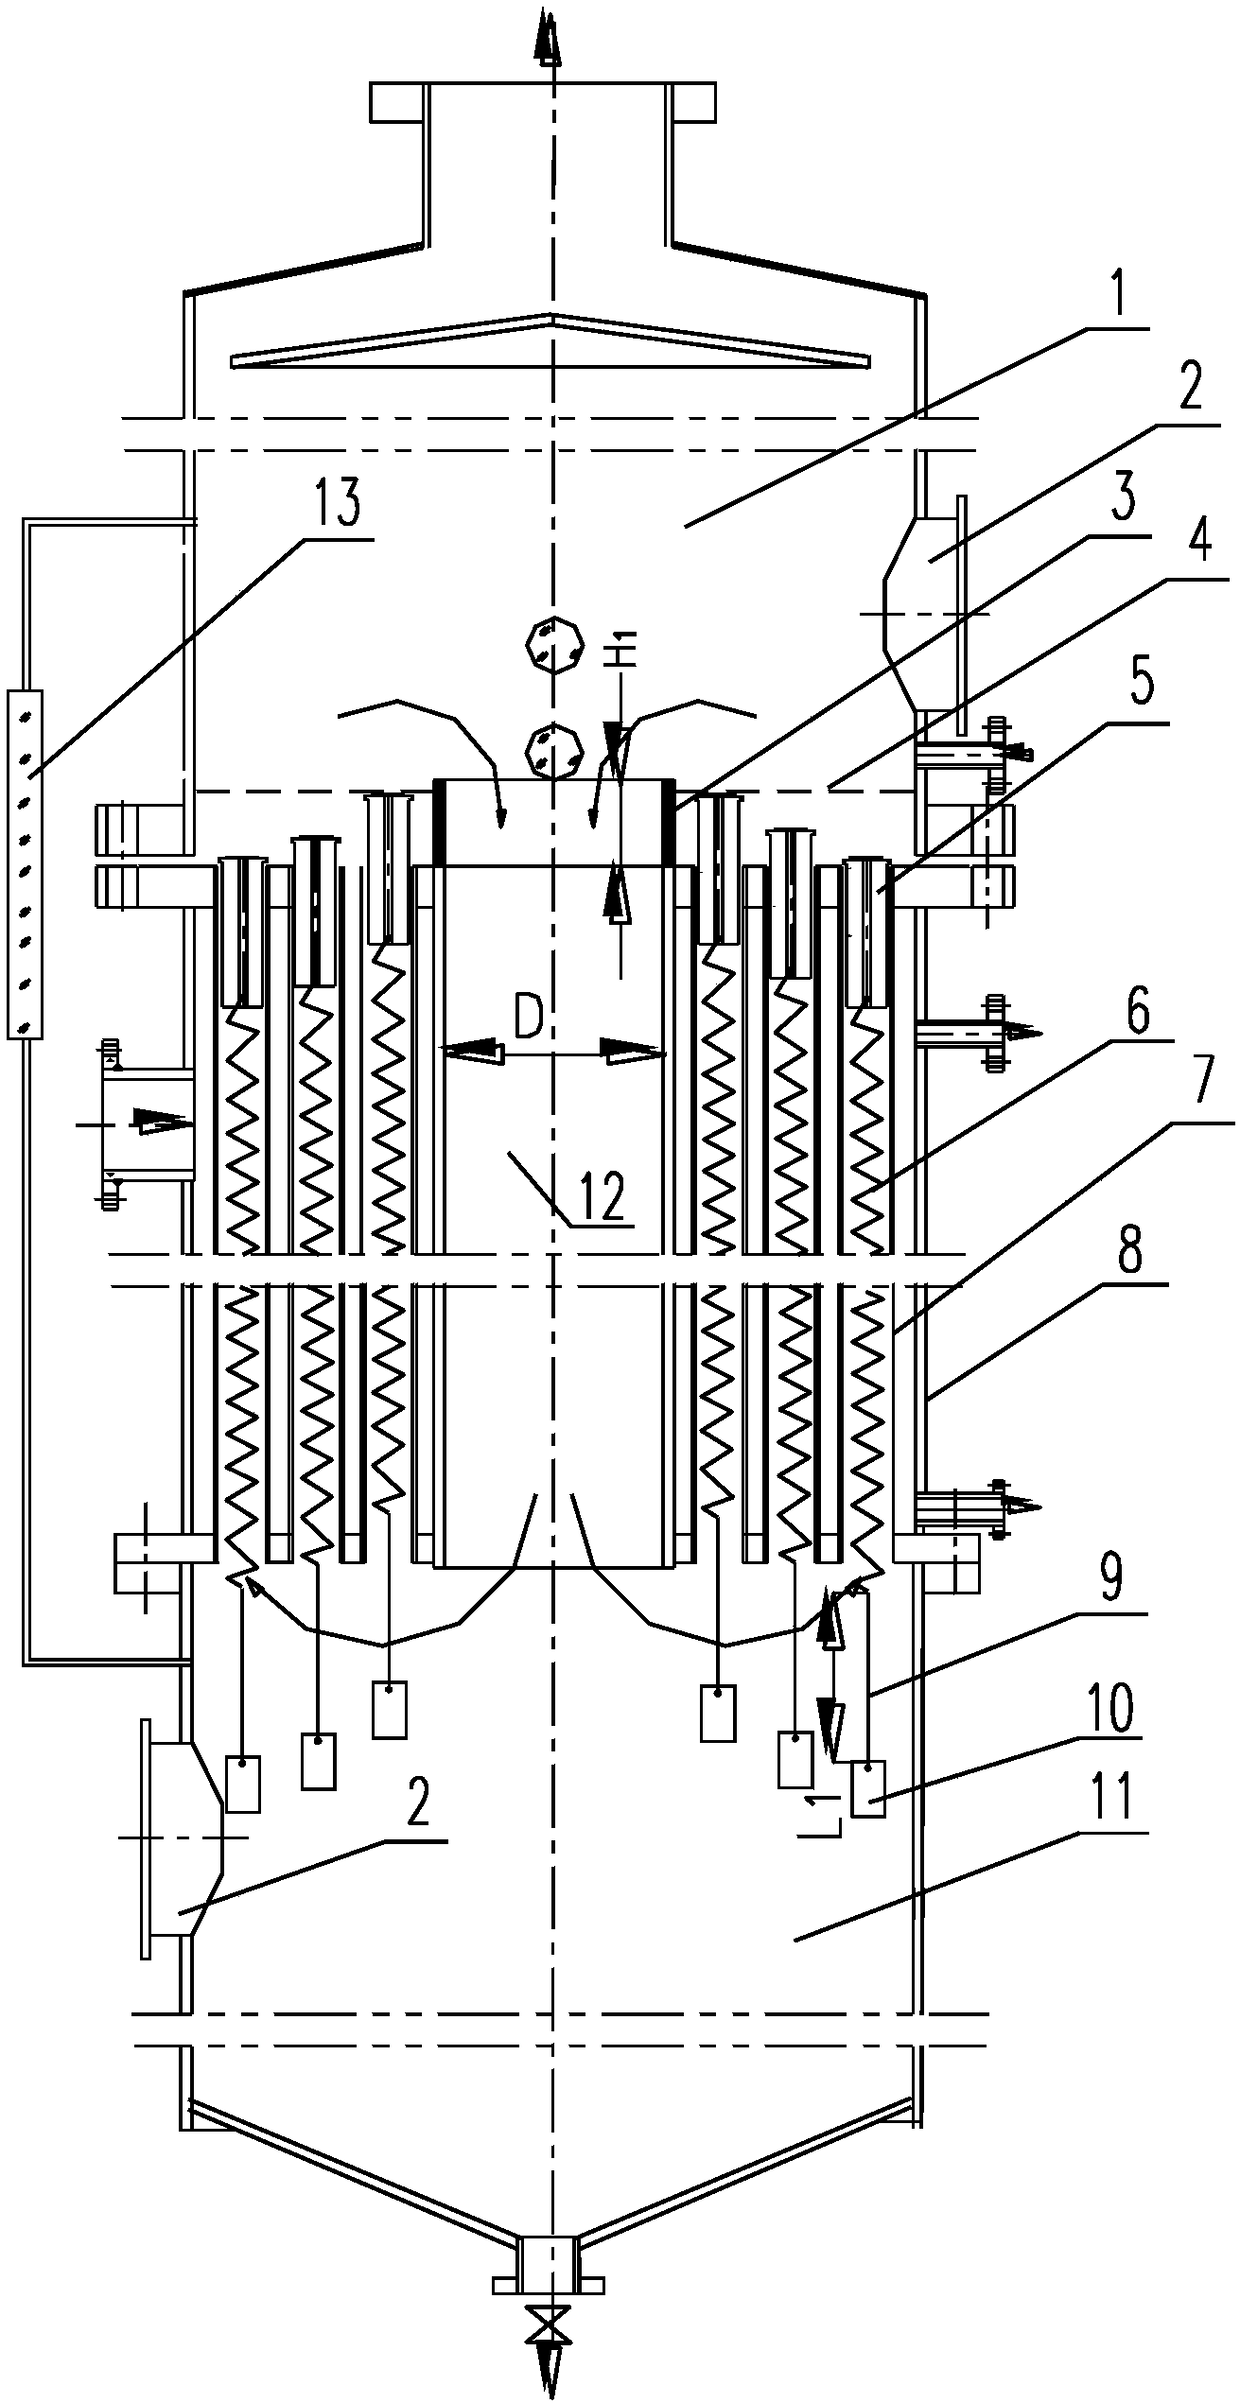 Heat transfer intensification and automatic cleaning mechanism of natural circulation evaporator